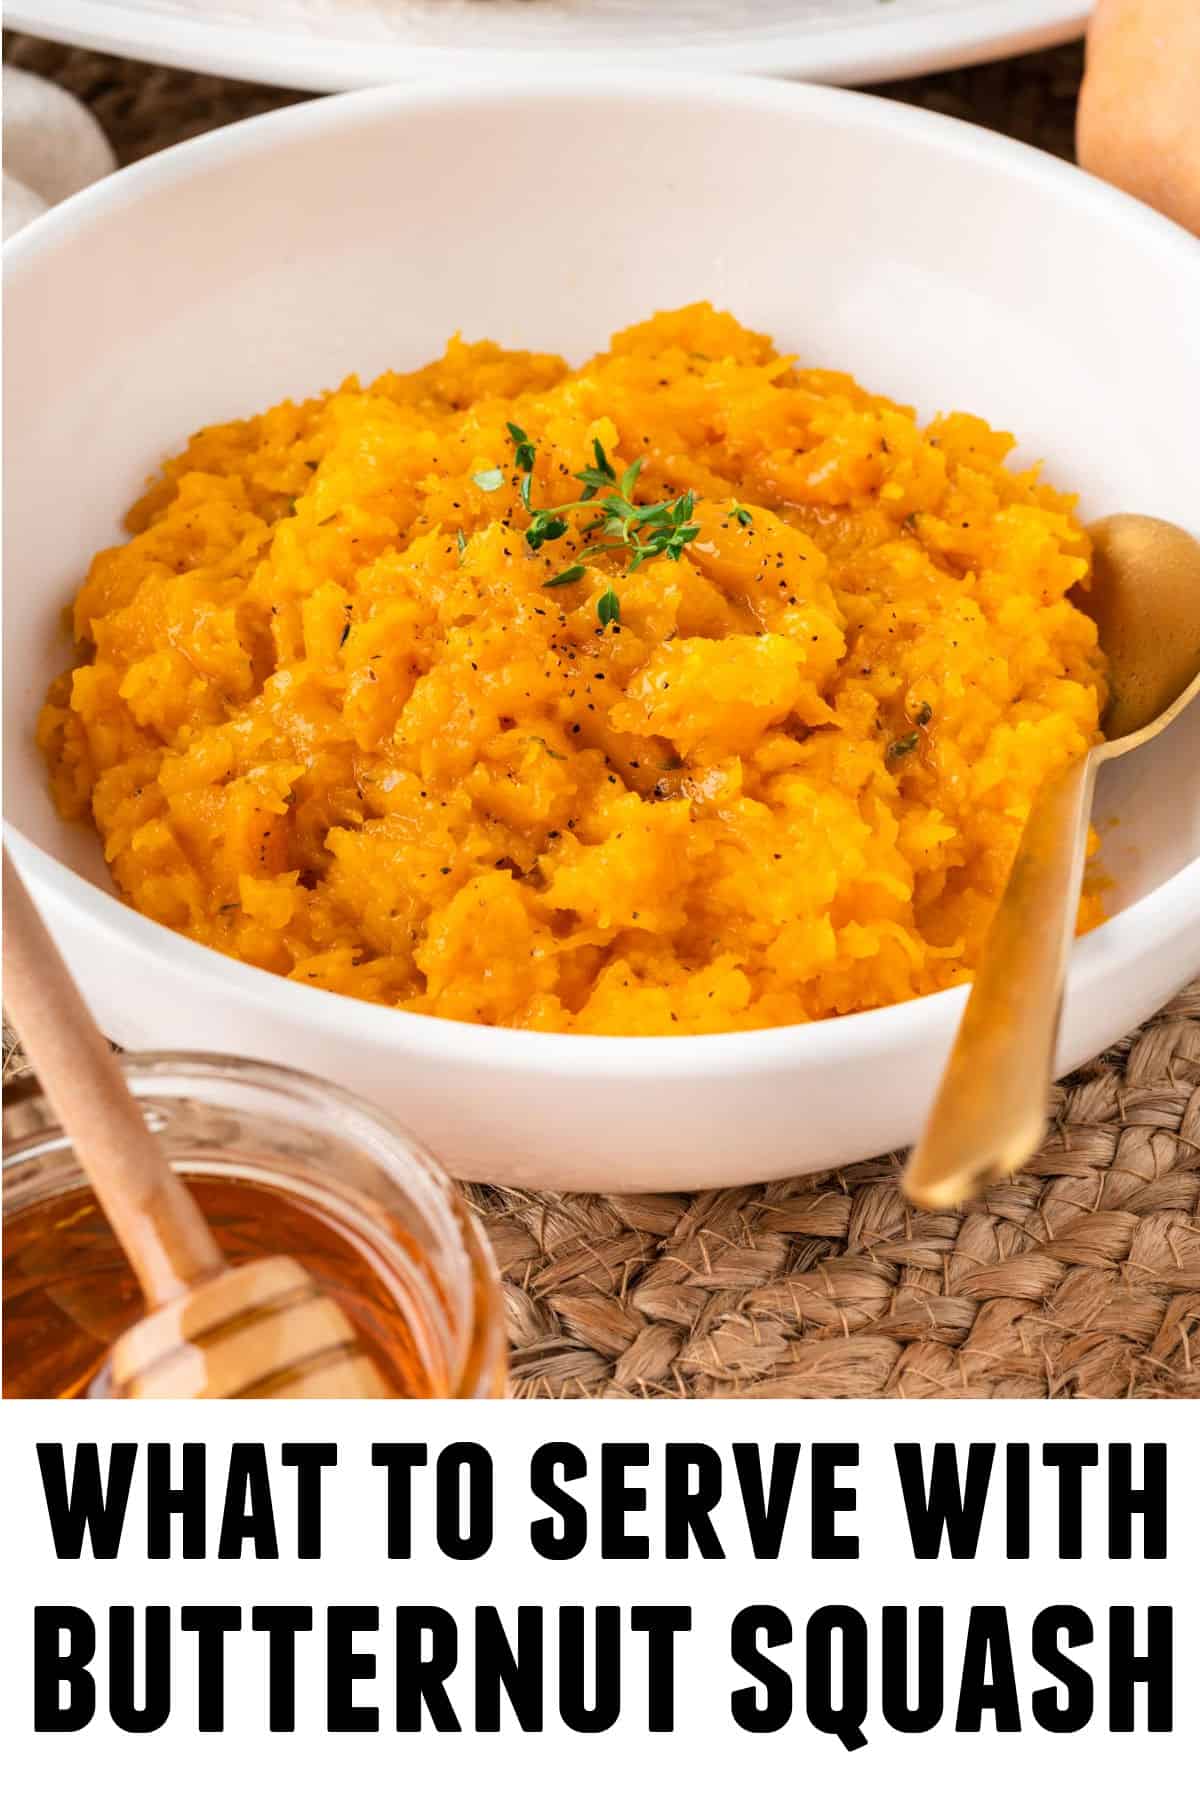 A photo of a bowl of mashed butternut squash with text on the bottom that says, "what to serve with butternut squash."